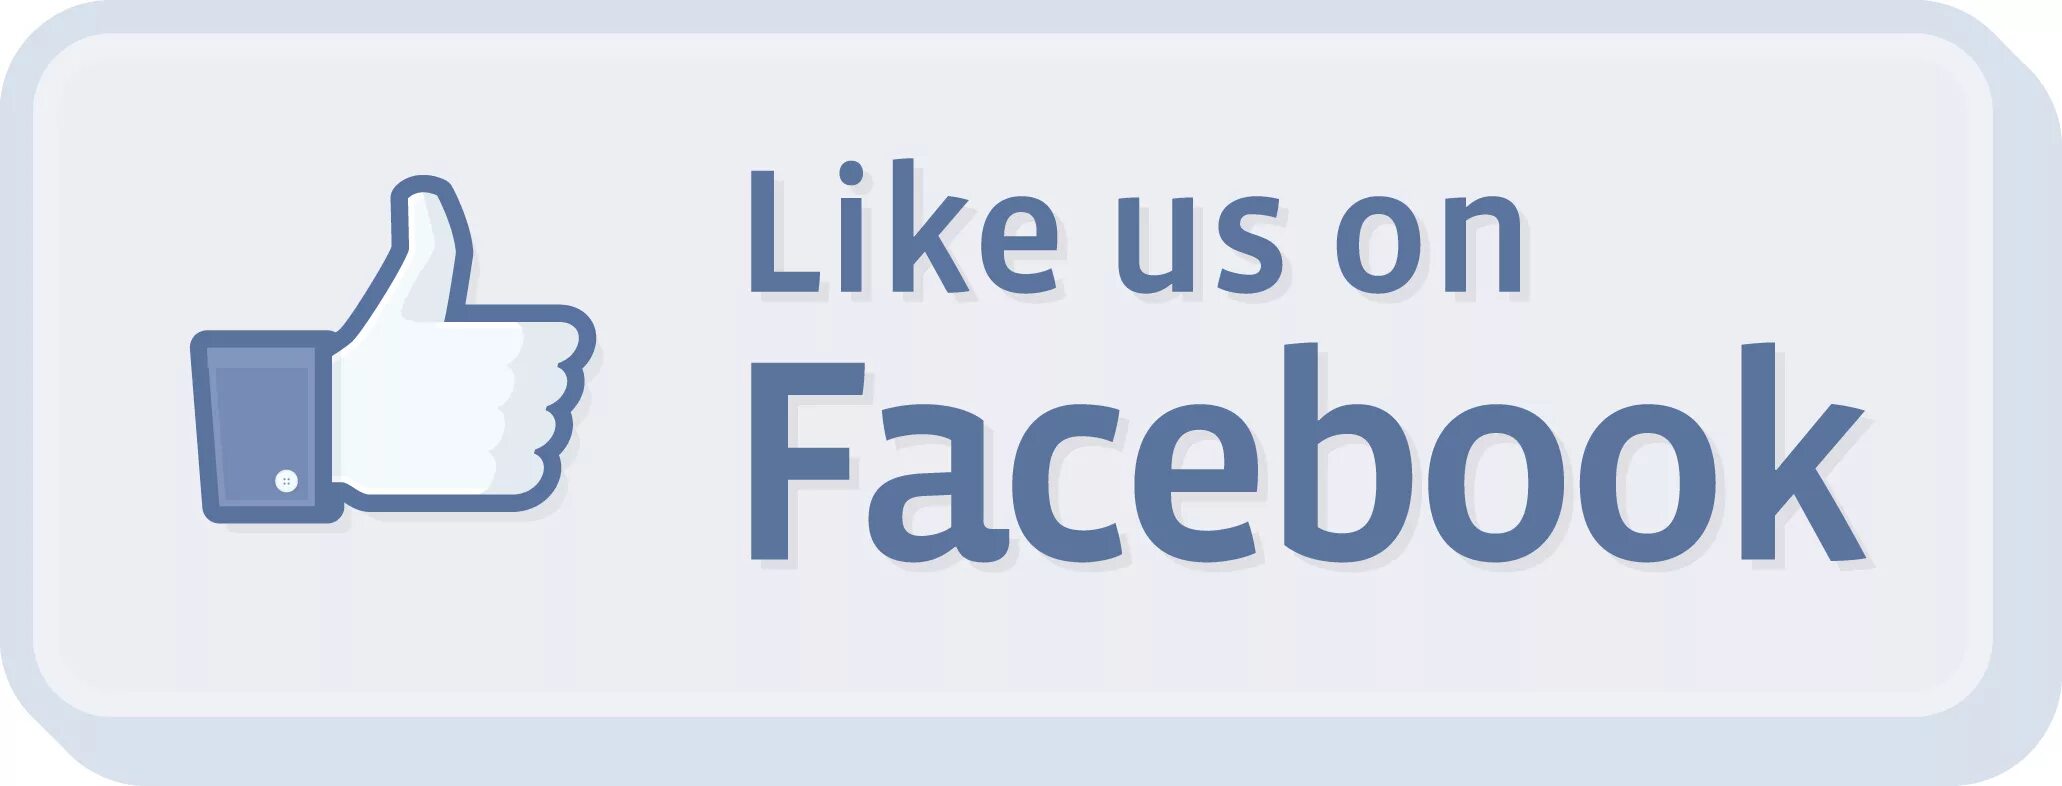 Like our. Like us on Facebook. Facebook Page likes. Like button for Facebook. Facebook follow.